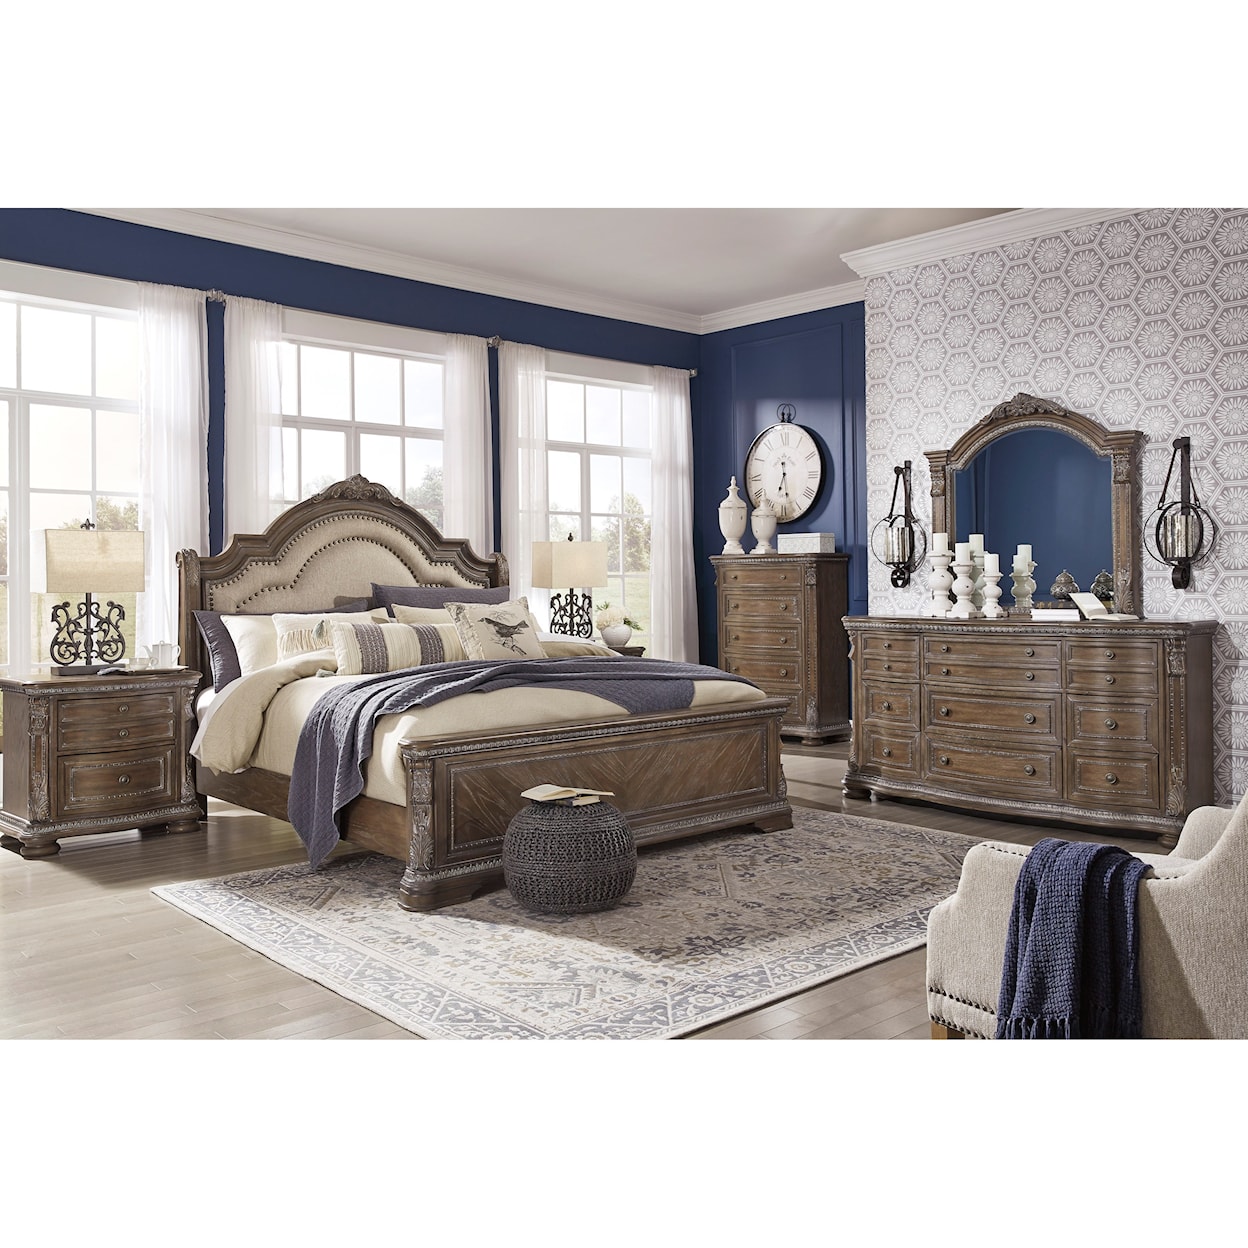 Signature Design by Ashley Charmond Queen Bedroom Group